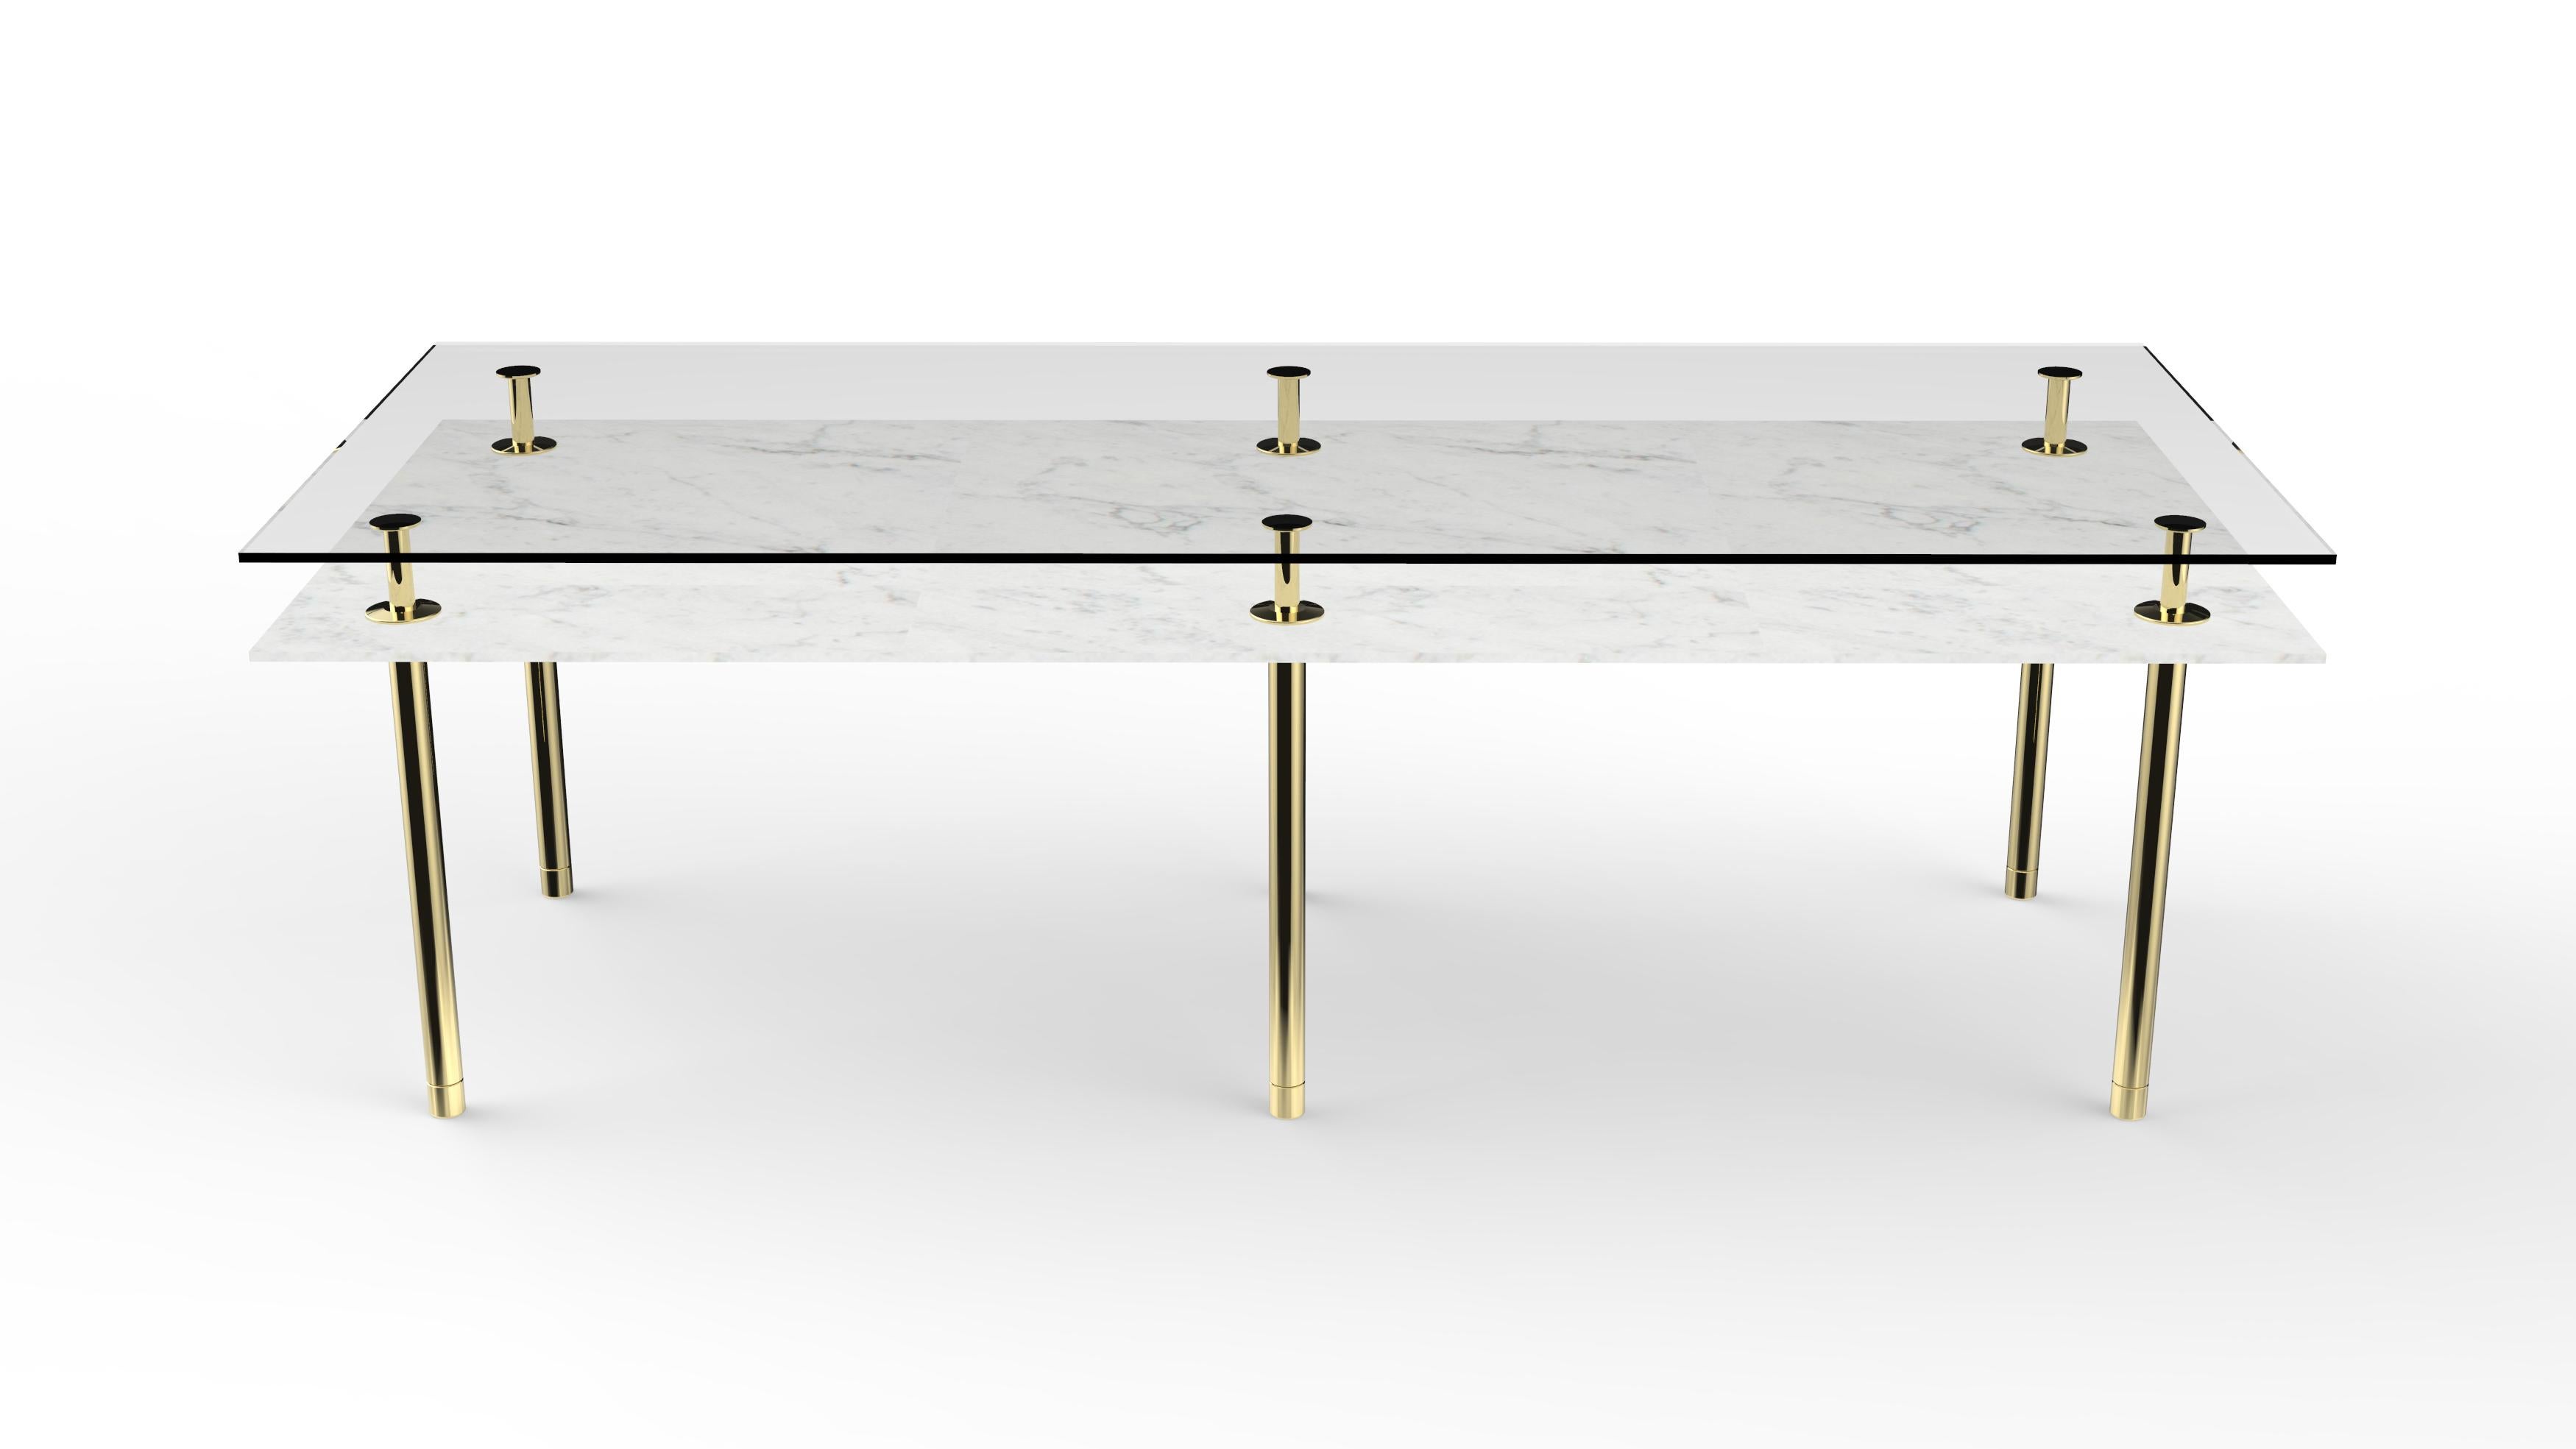 Rectangular table in crystal and brass. The designer imagines a turning point in the use of such a precious finishes such as polished brass: from the idea of almost a unique object in its perfect craftsmanship, to the system to be built starting